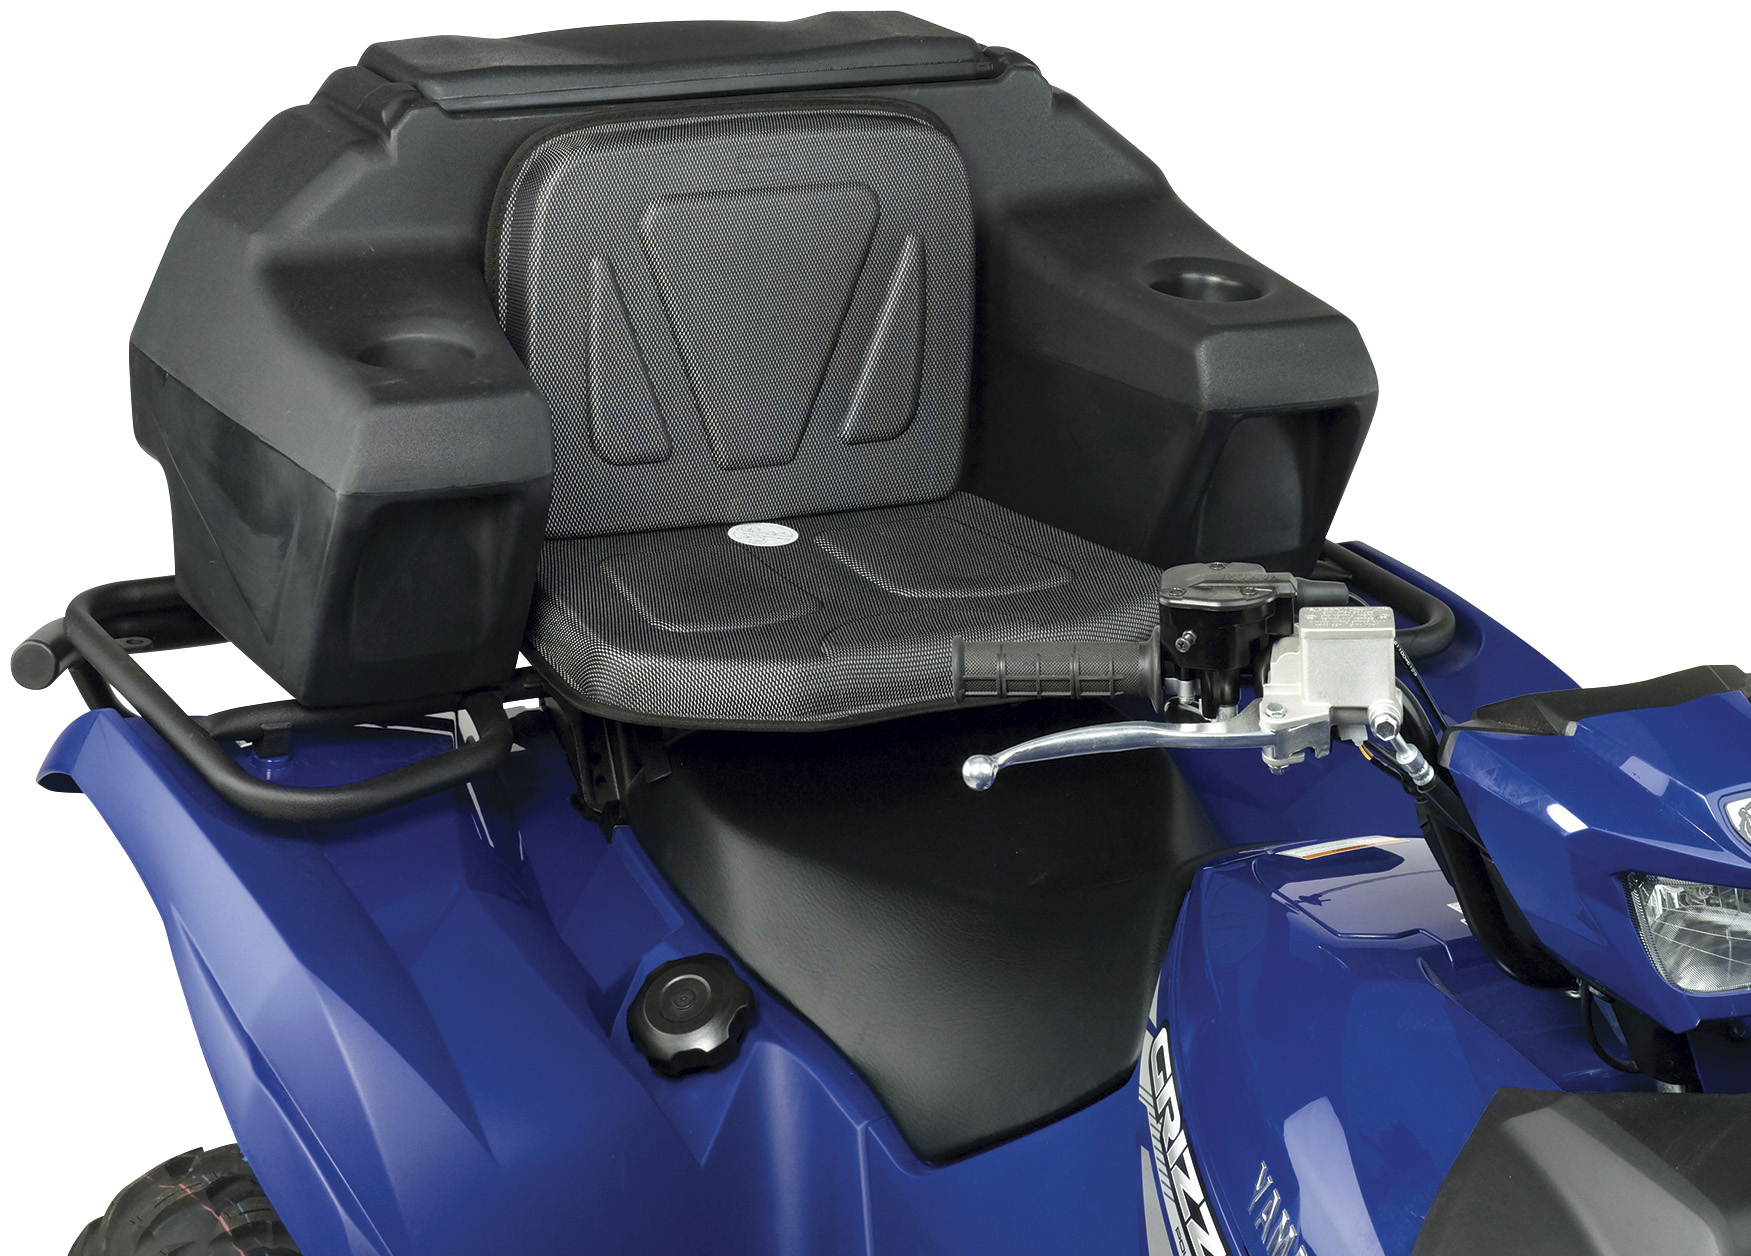 The Moose Utility Division Helmet Storage Trunk is ideal for anyone who needs to store their helmets when they stop to take a break from riding their ATV.